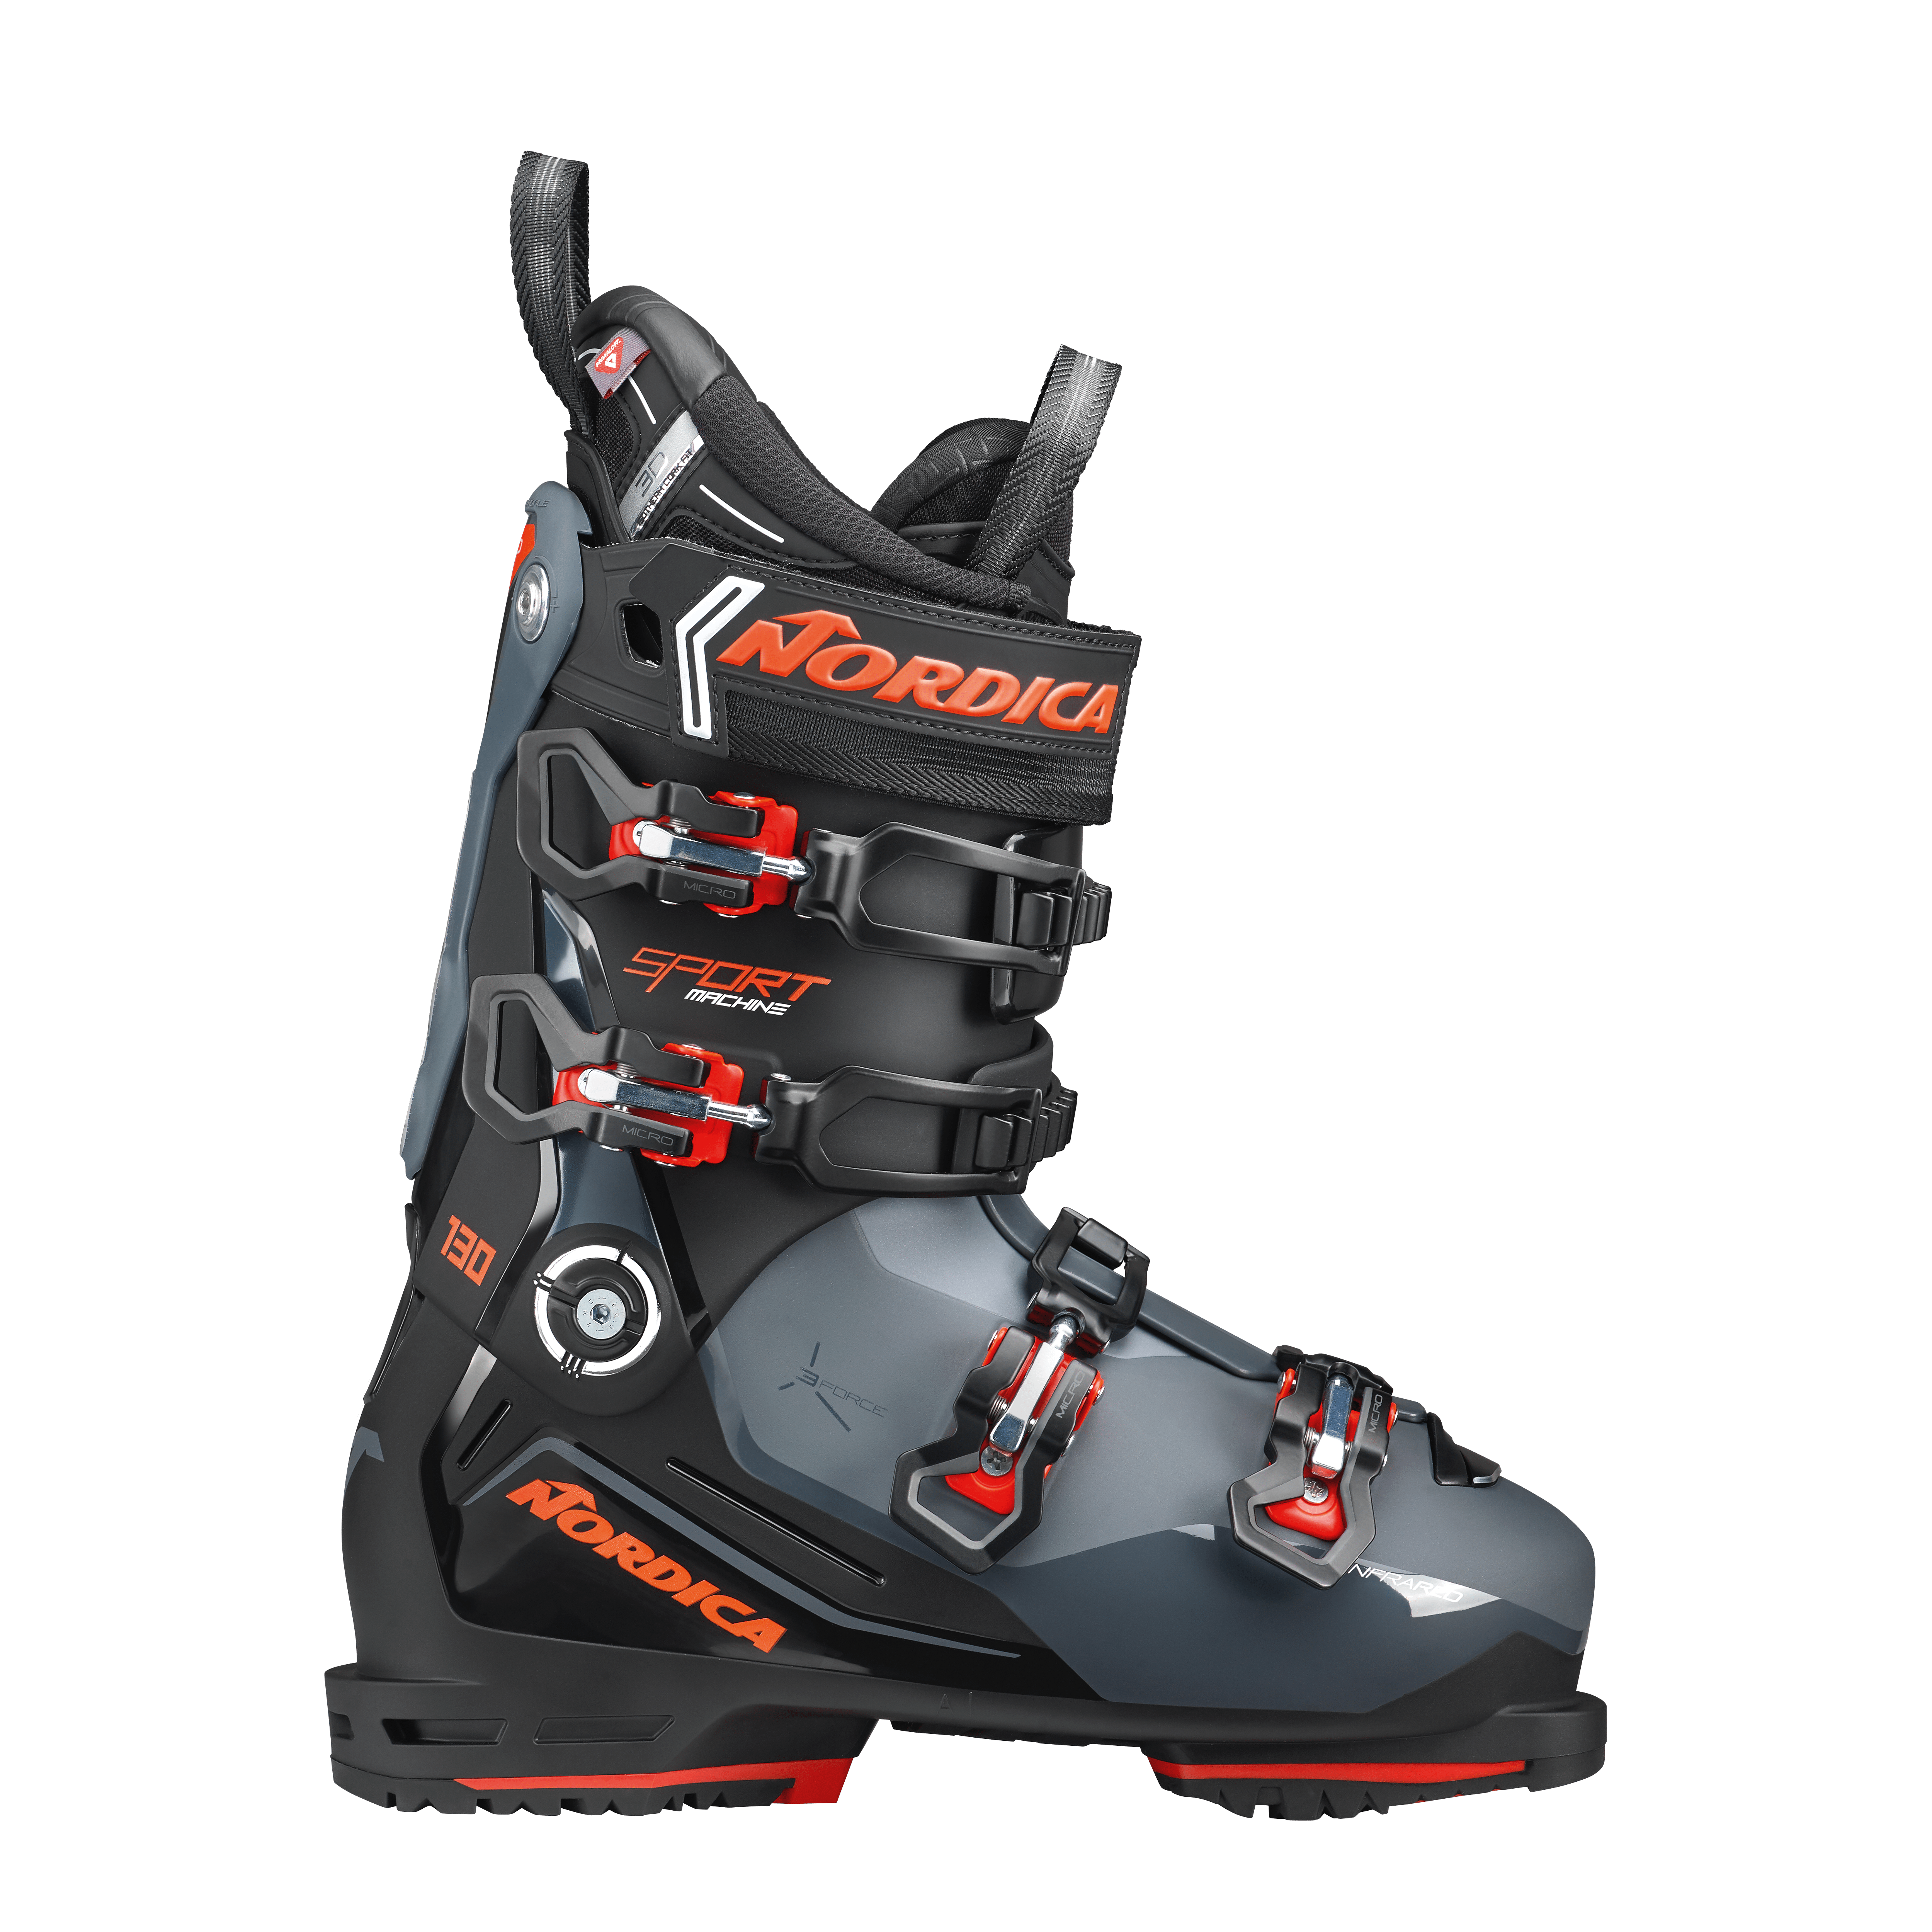 Sportmachine Nordica - Skis and Boots – Official website